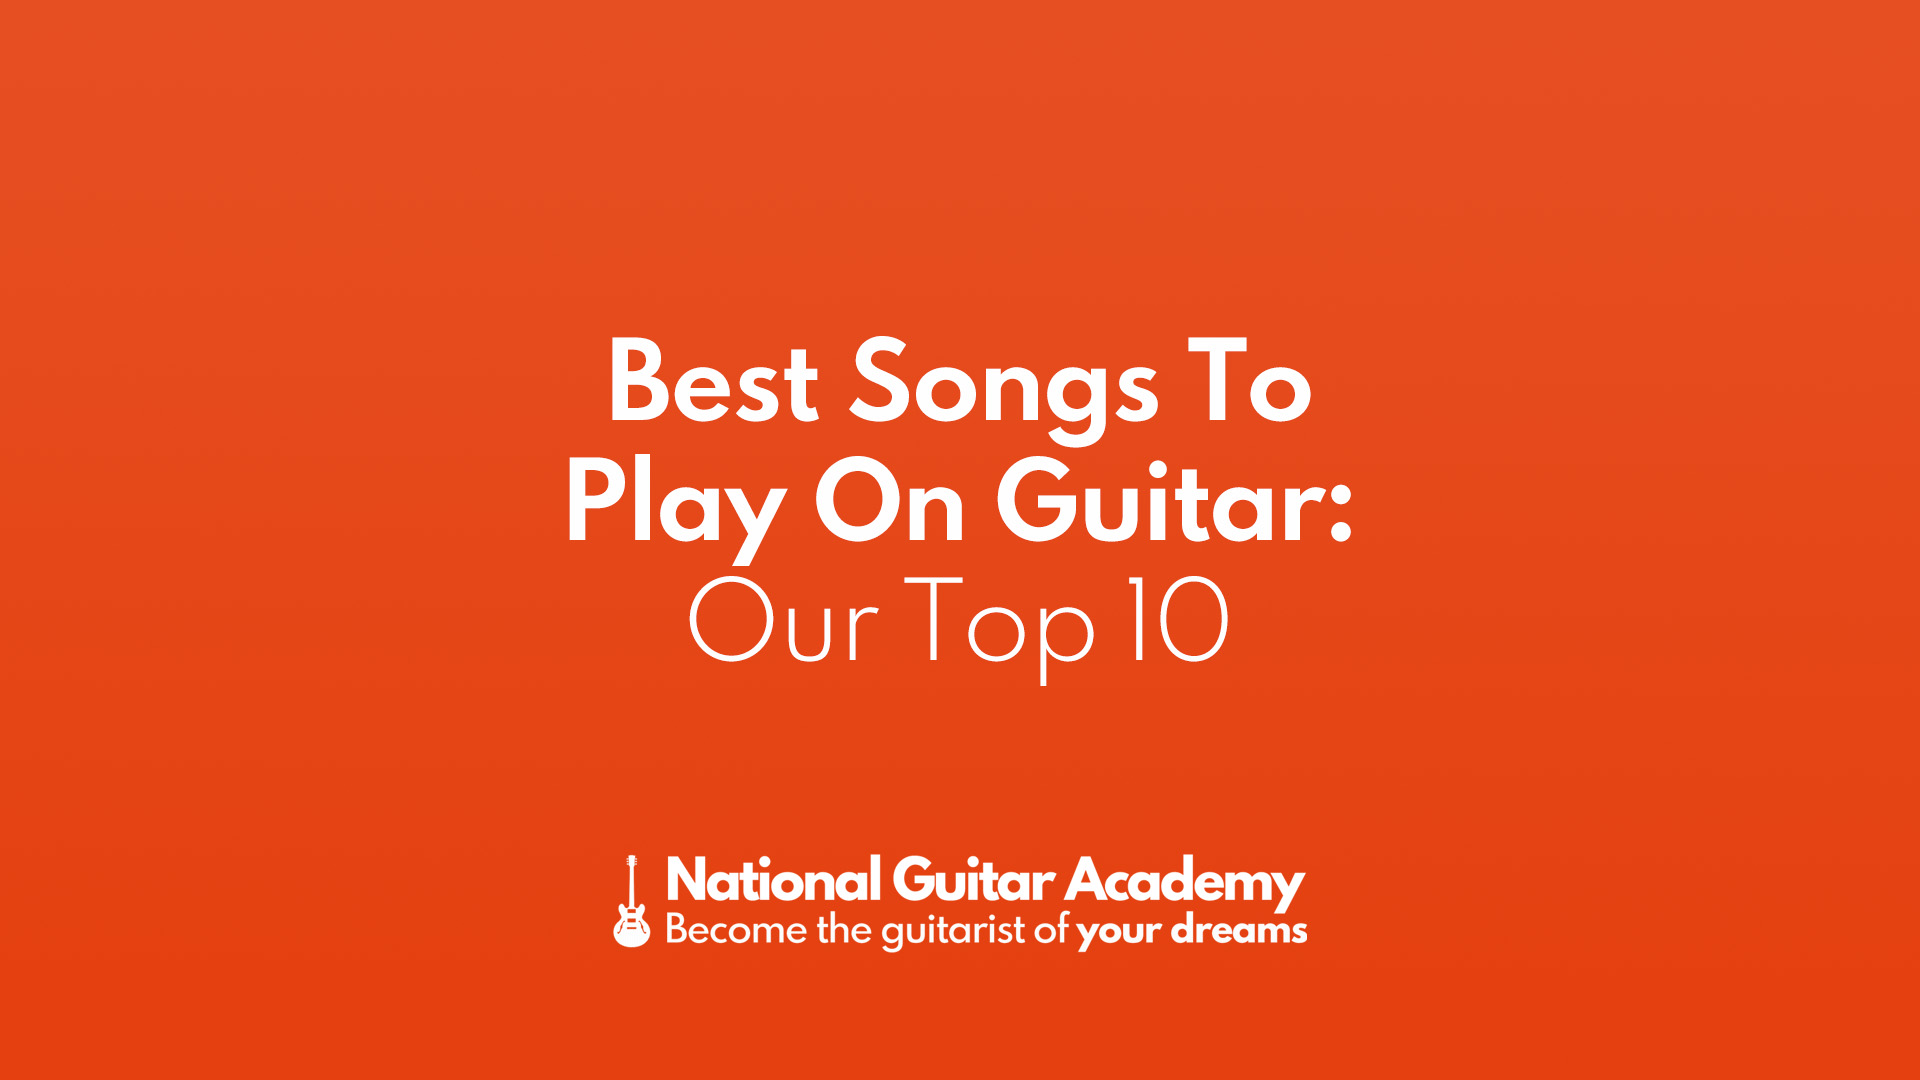 Best Songs To Play On Guitar: Our Top 10 - National Guitar Academy